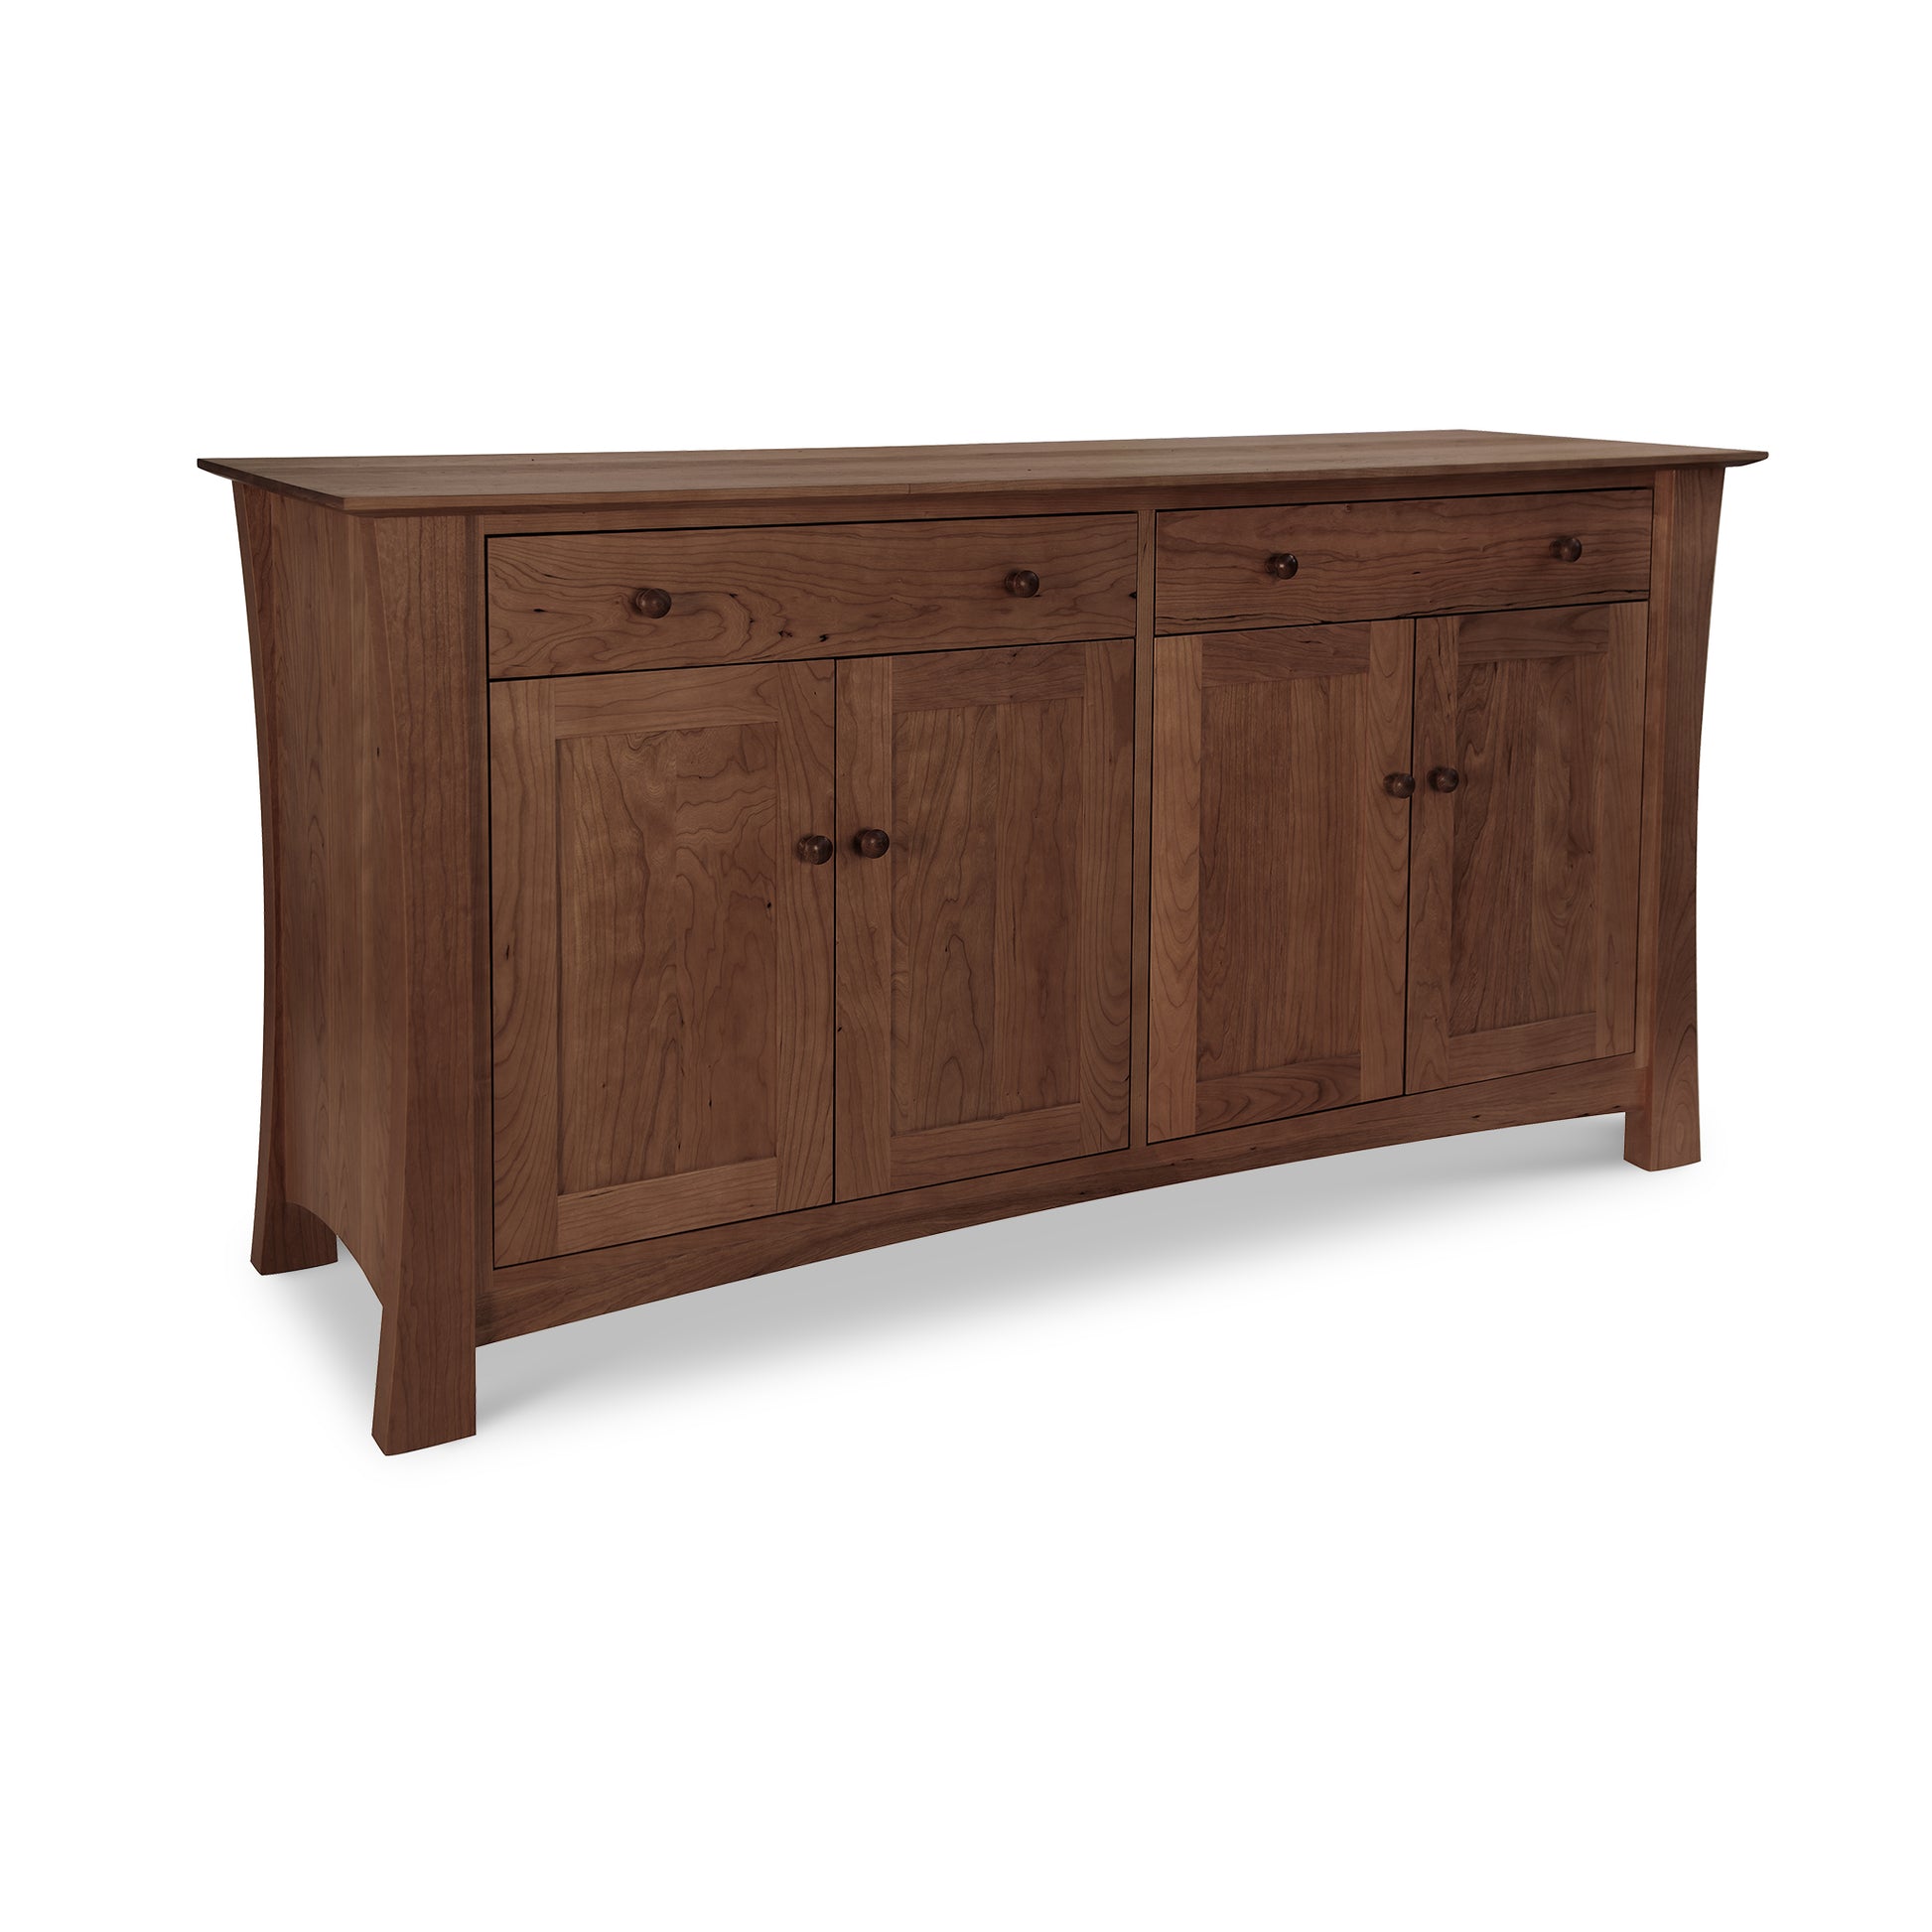 The Lyndon Furniture Andrews Buffet exudes a modern feel with its sleek design and is a perfect addition to any contemporary kitchen. This wooden sideboard features doors and drawers for convenient storage.